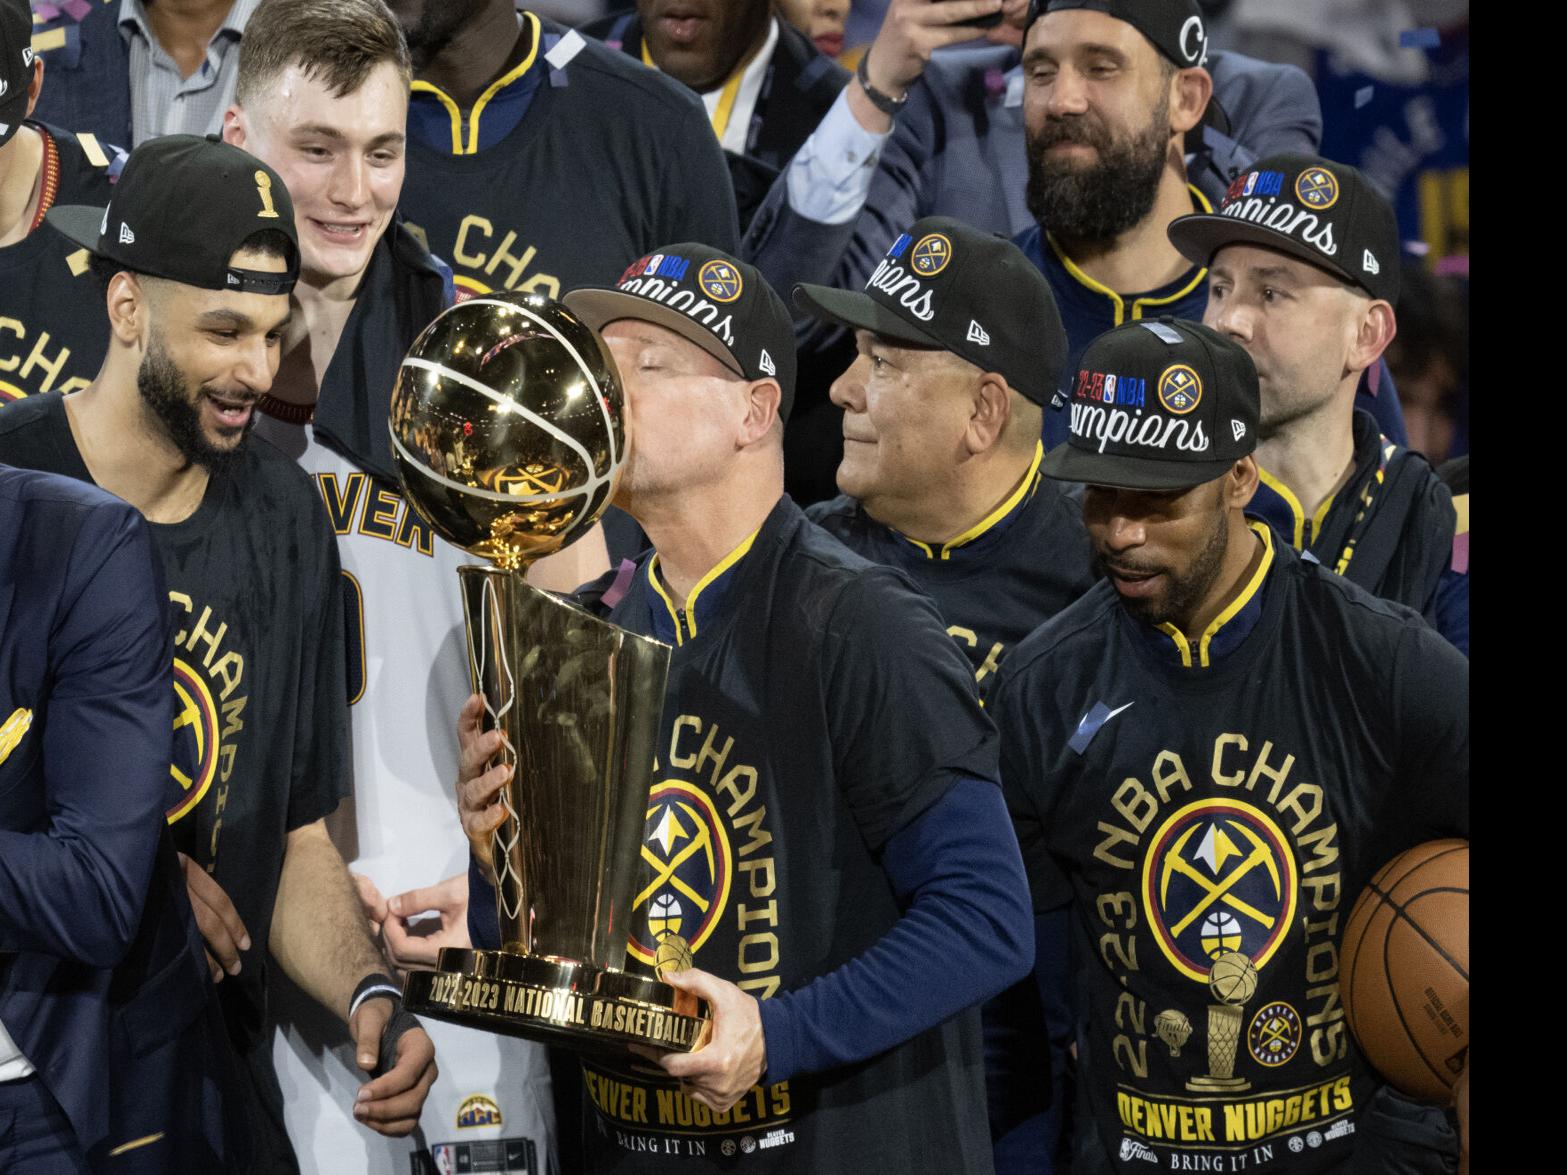 Video Shows Larry O'Brien Trophy Skydiving to Heat-Nuggets NBA